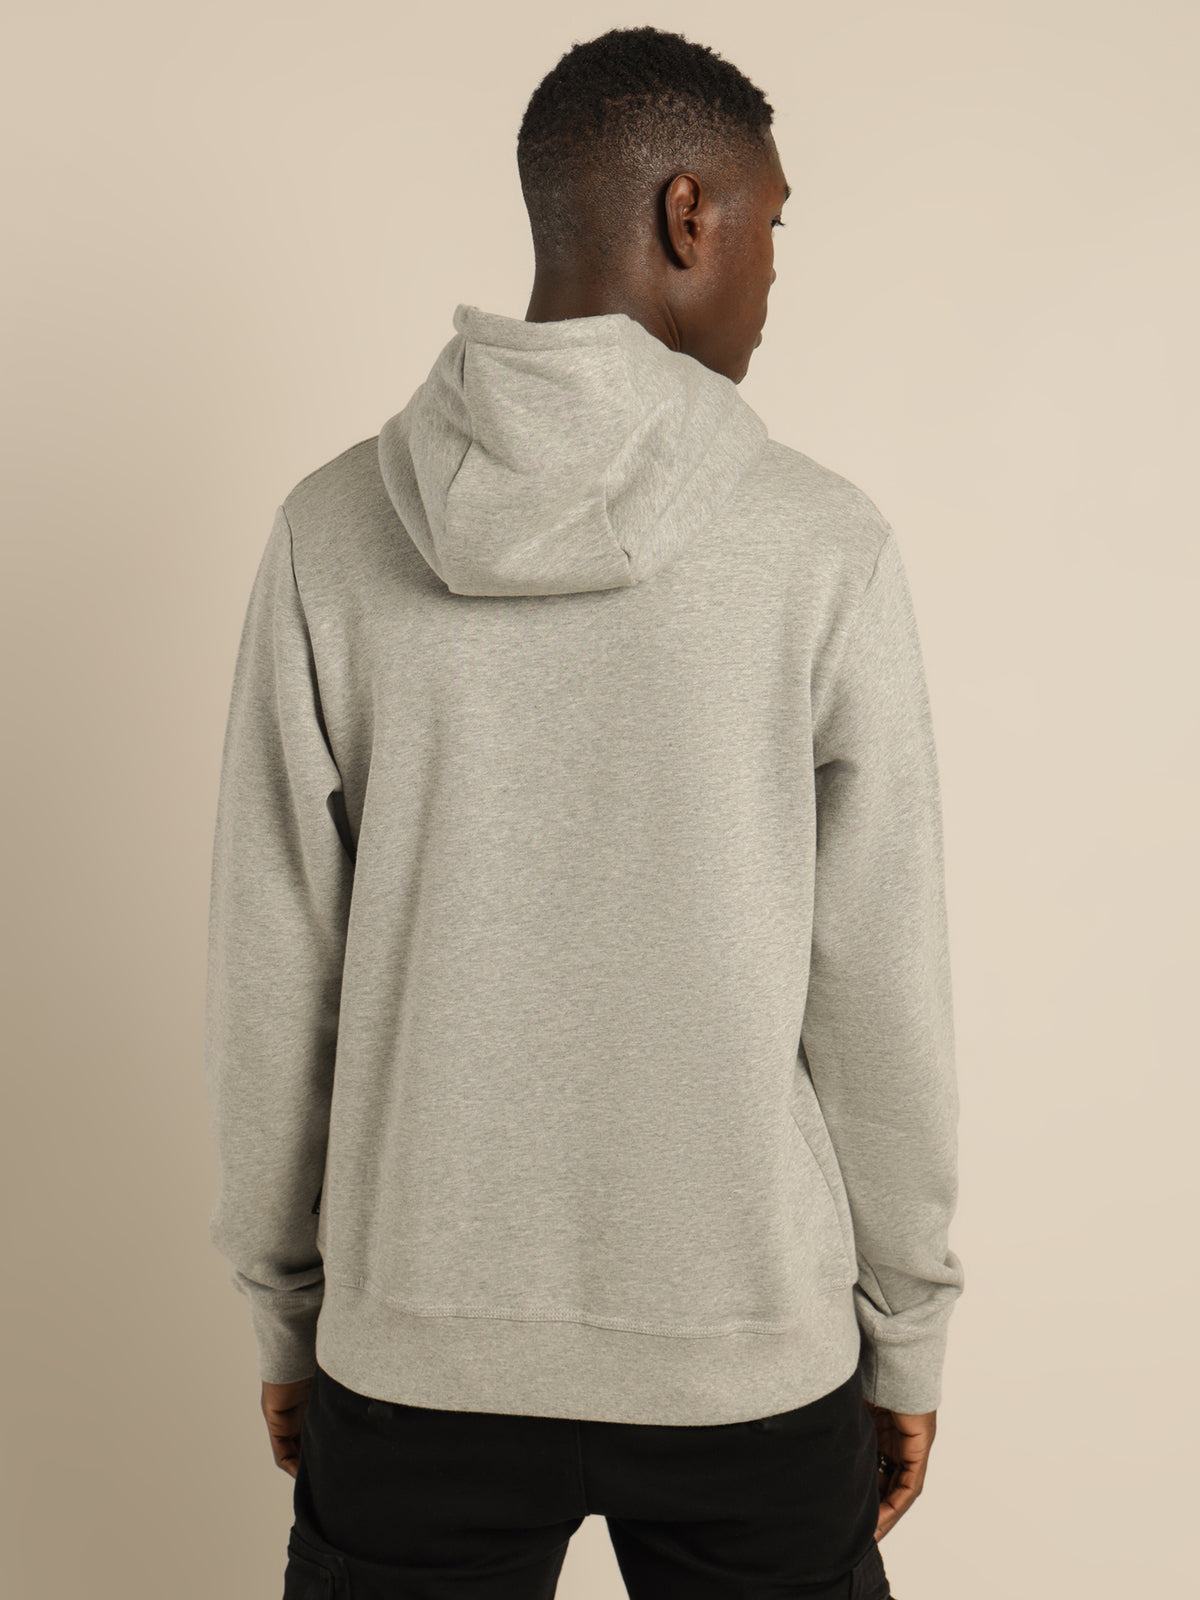 Championship Hooded Sweat in Snow Marle